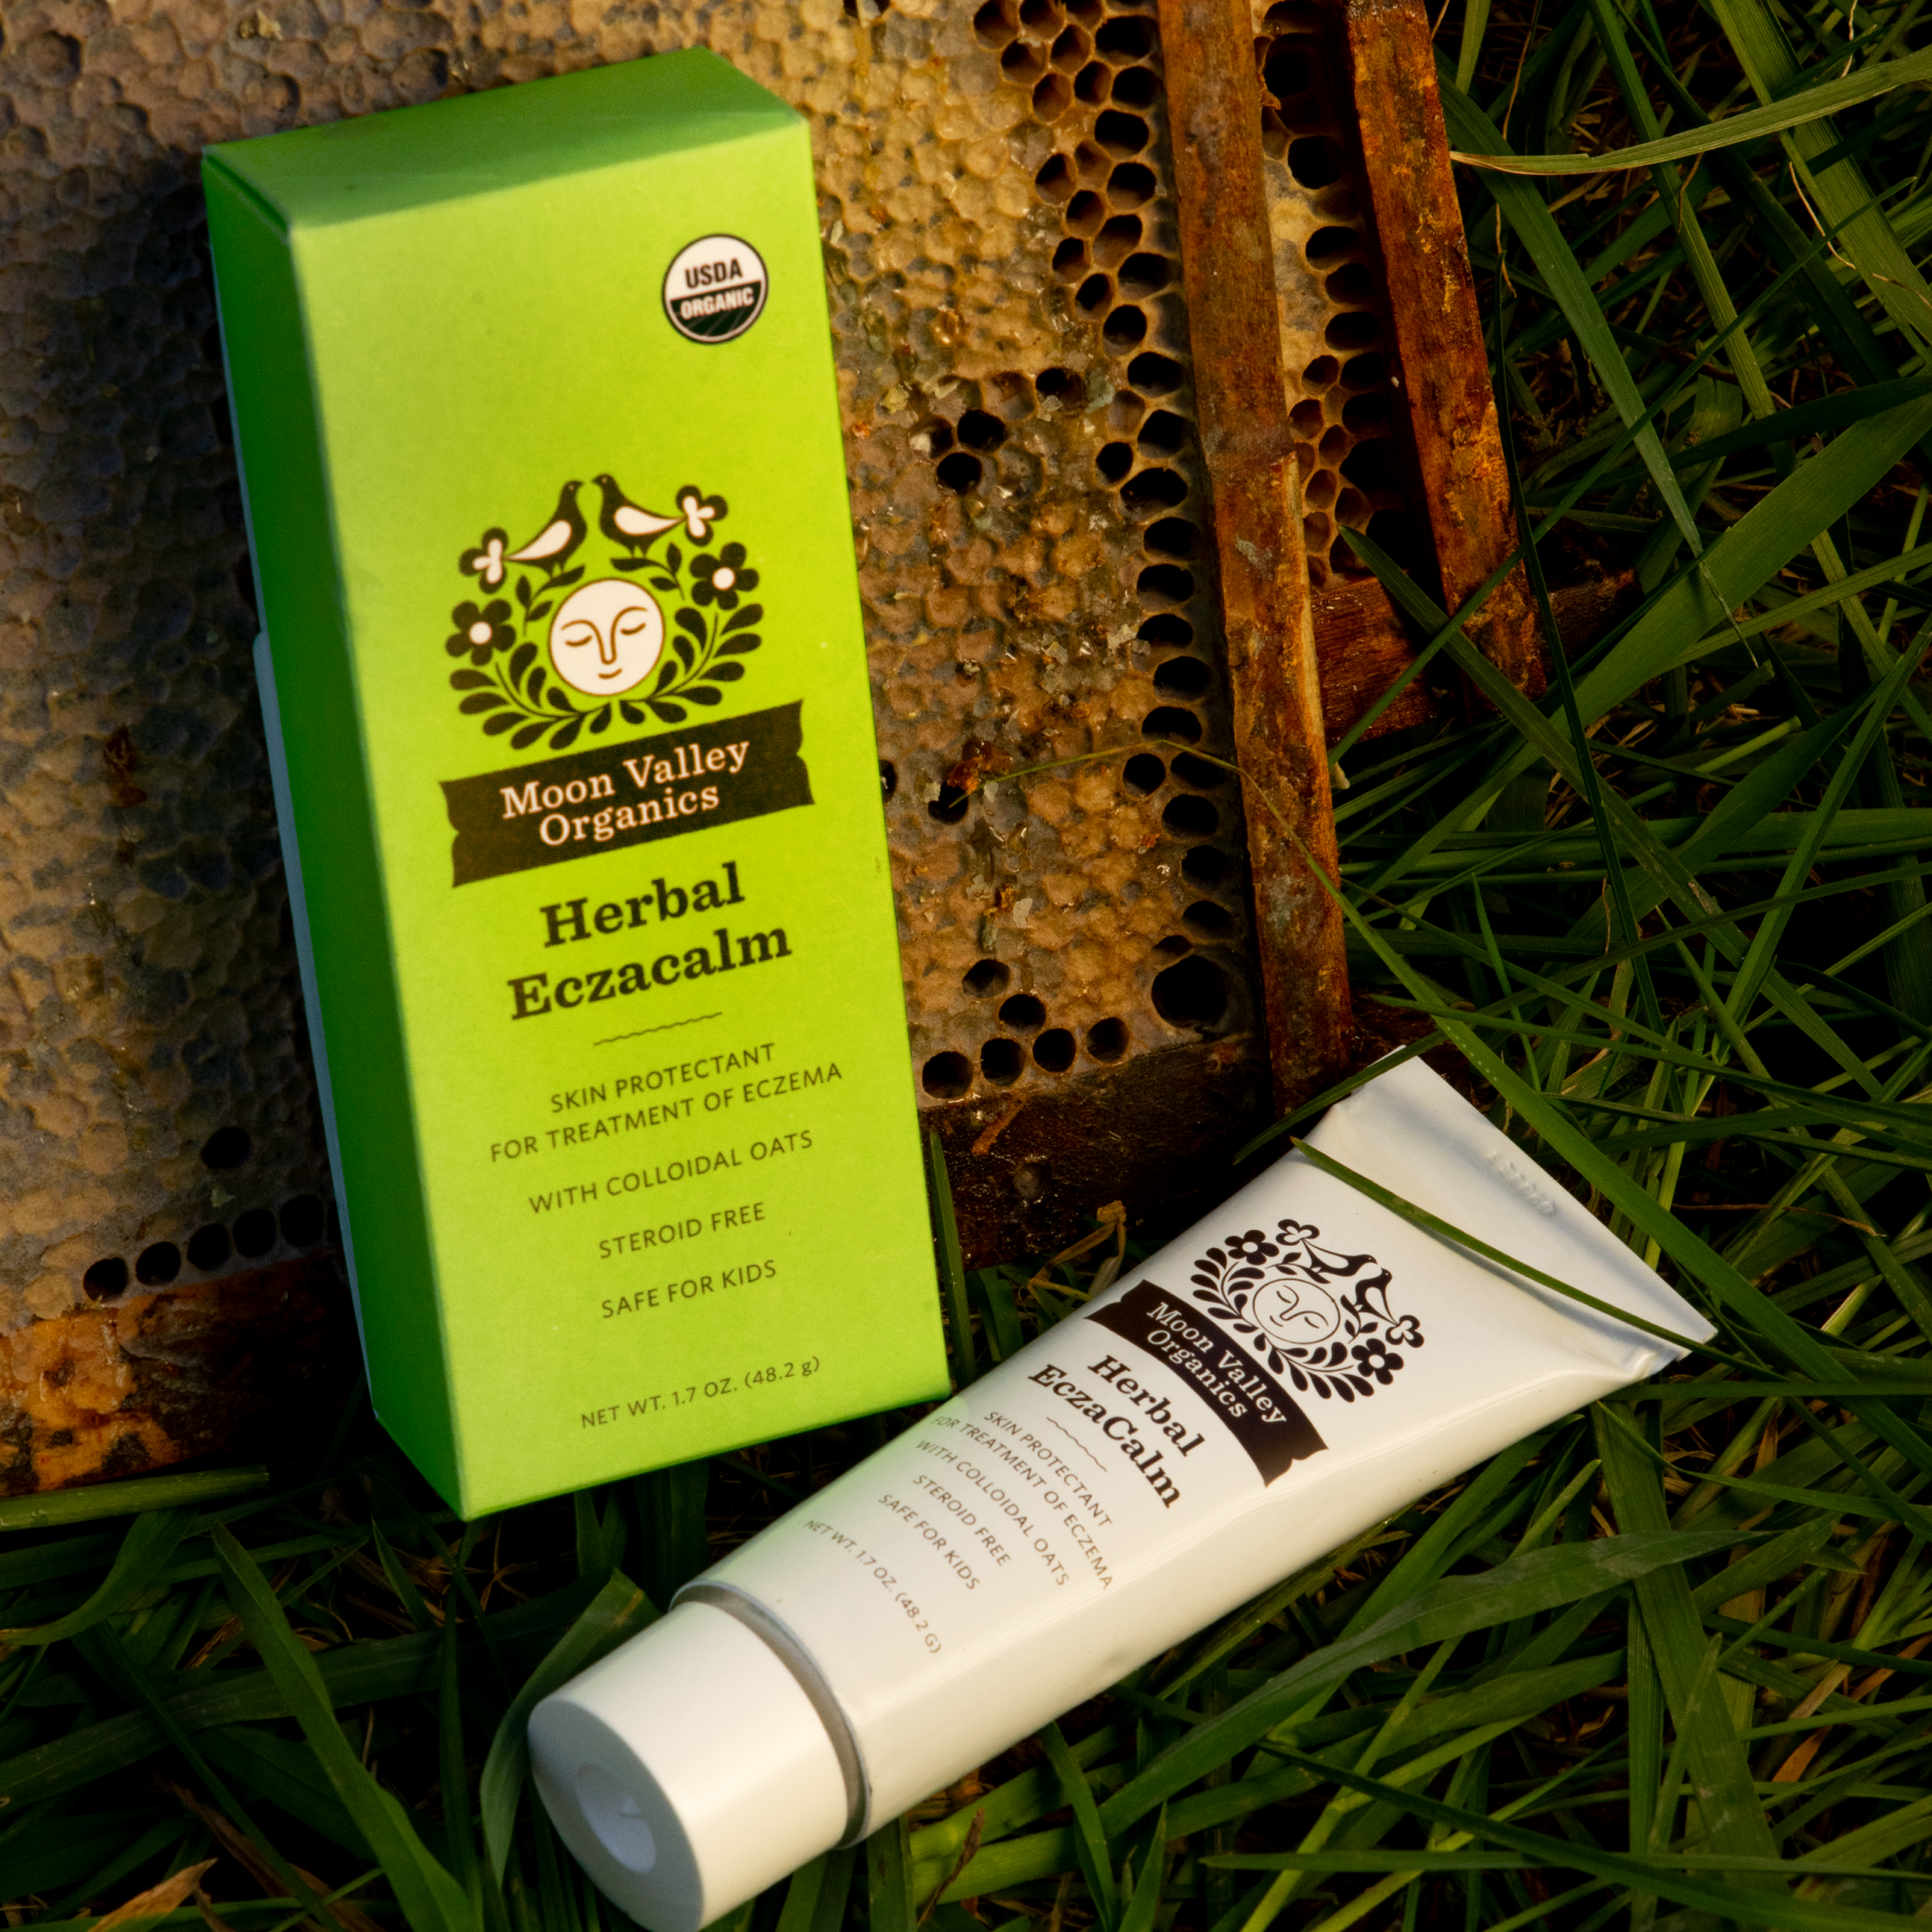 Moon Valley Organics Herbal Eczacalm Box and tube laying in the grass against a bee box and honeycomb